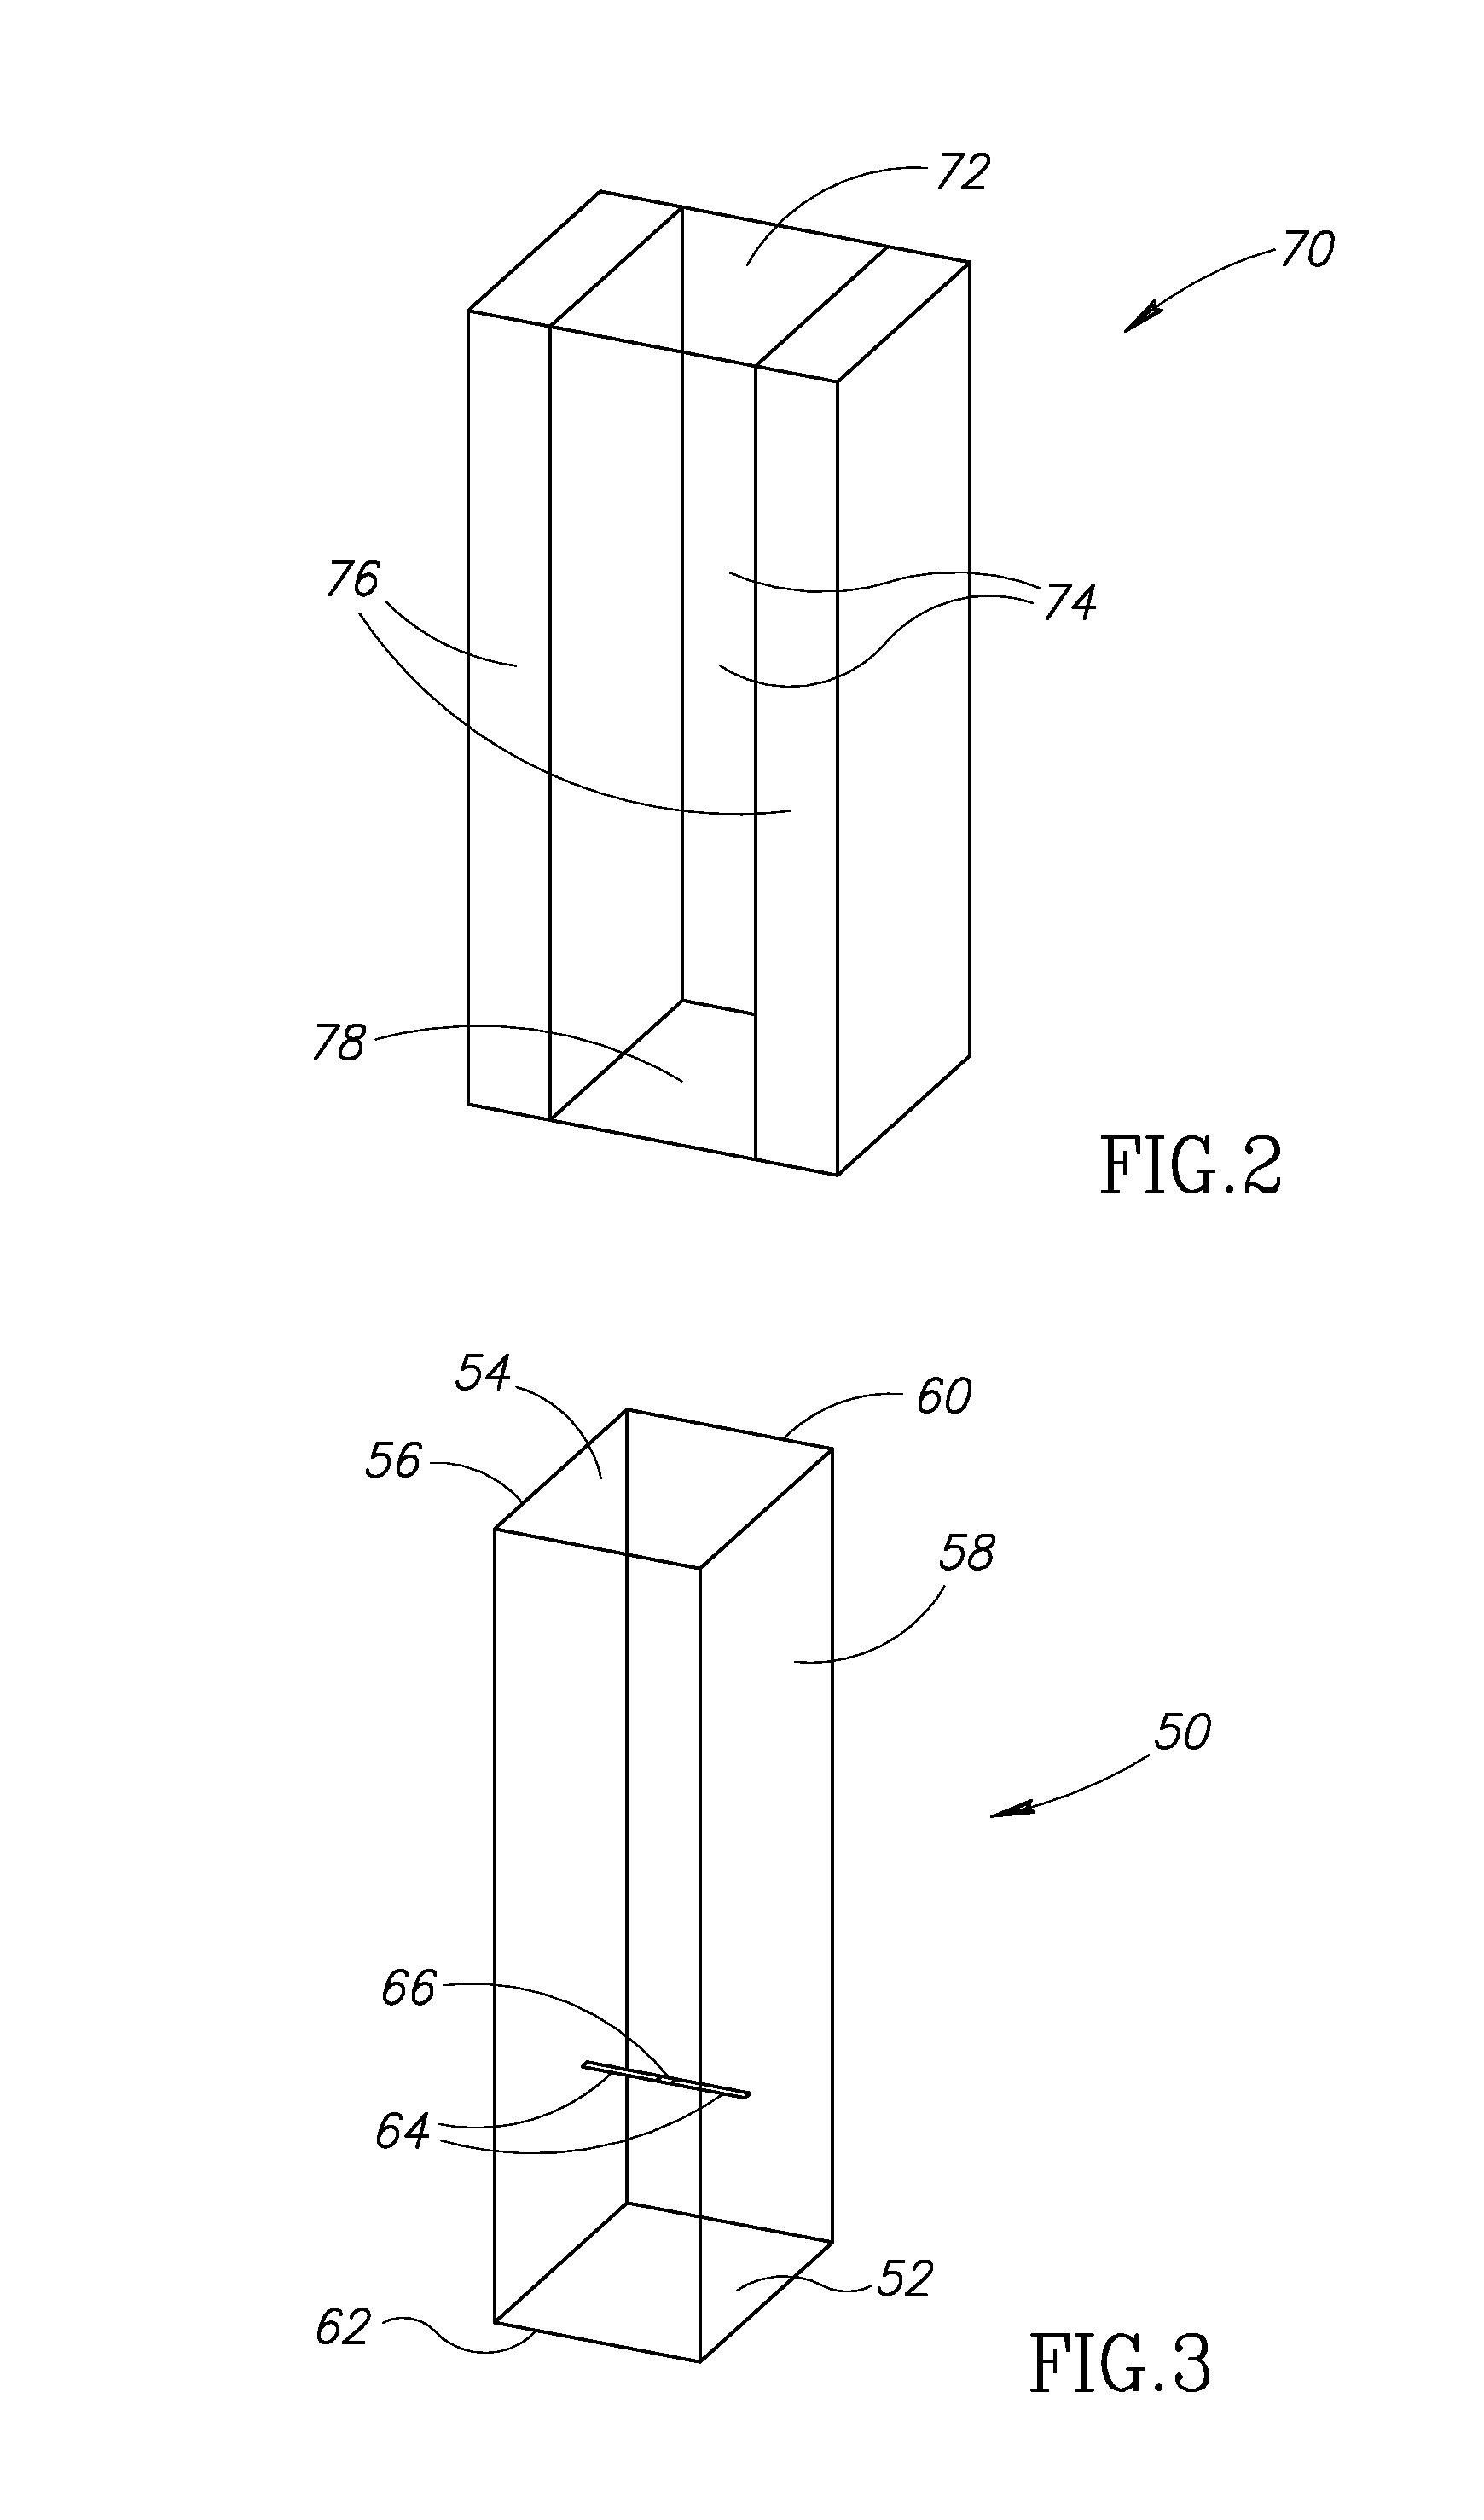 Method of simulating the absorption of plane waves using fem software tools